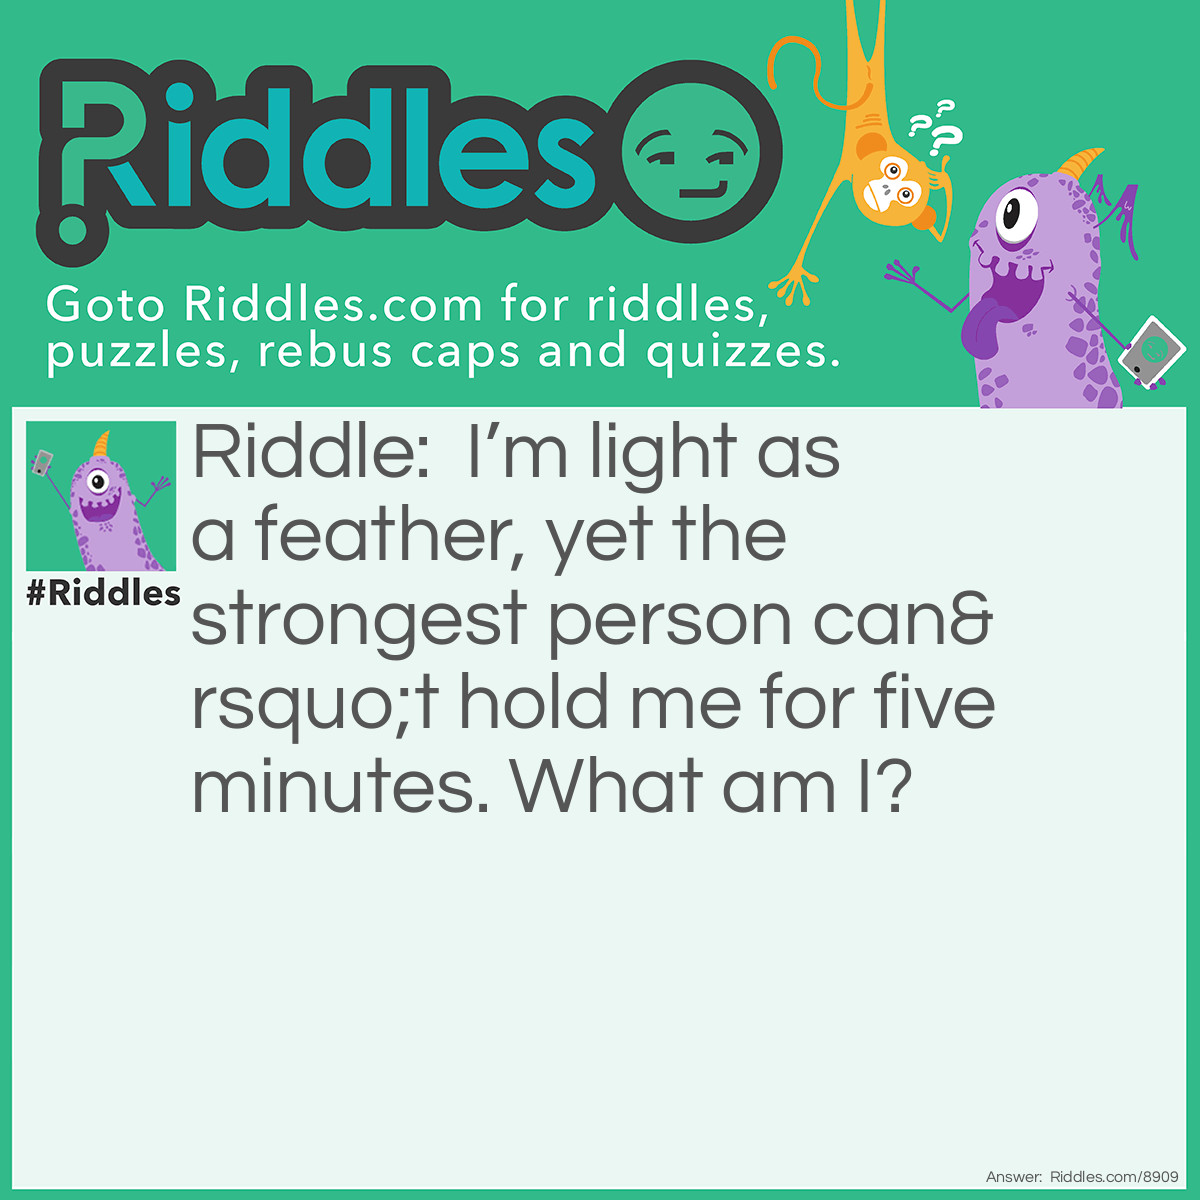 Riddle: I'm light as a feather, yet the strongest person can't hold me for five minutes. What am I? Answer: Your breath.